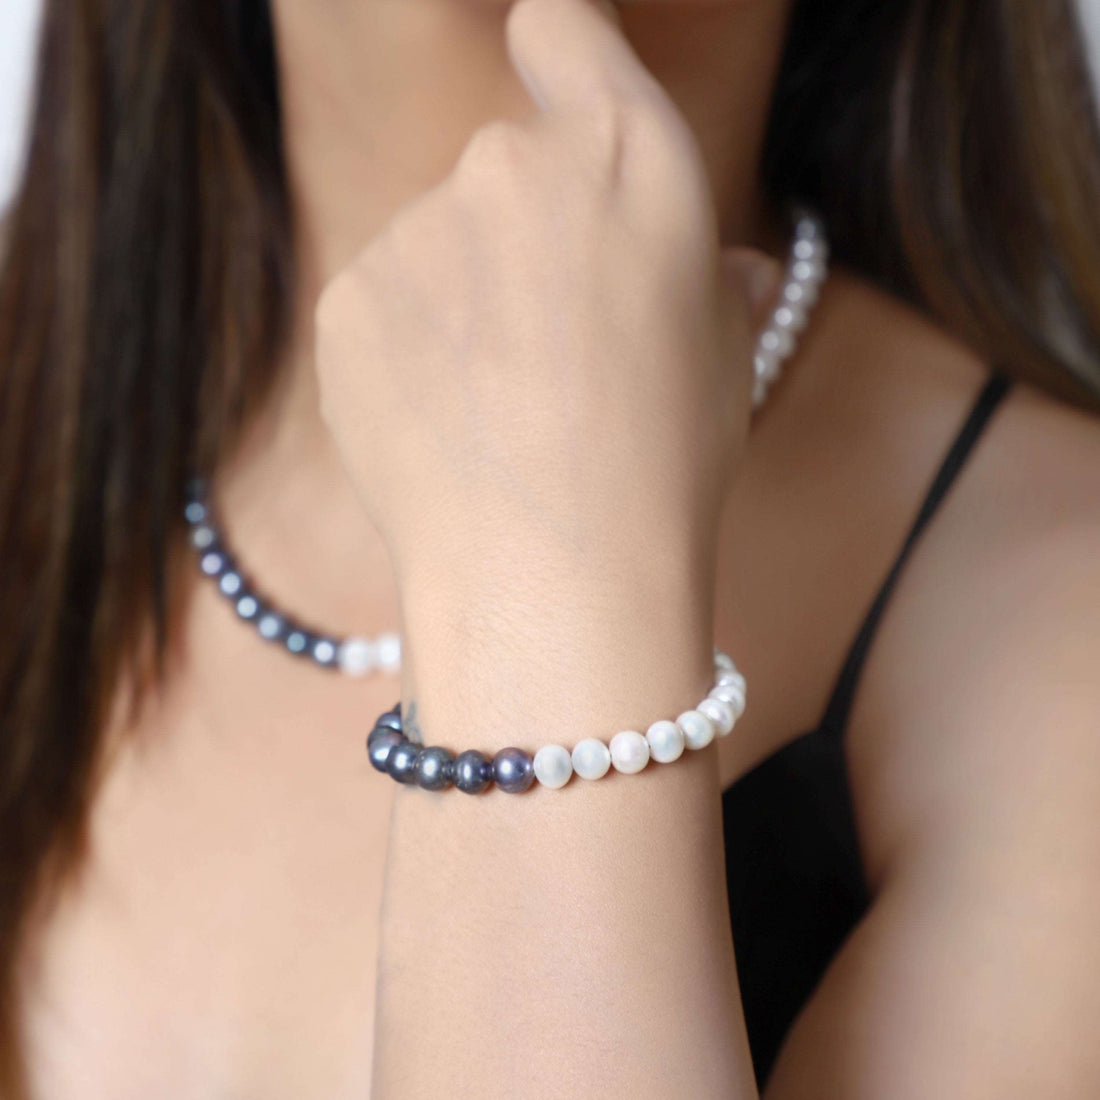 Black and White Pearl Silver Bracelet